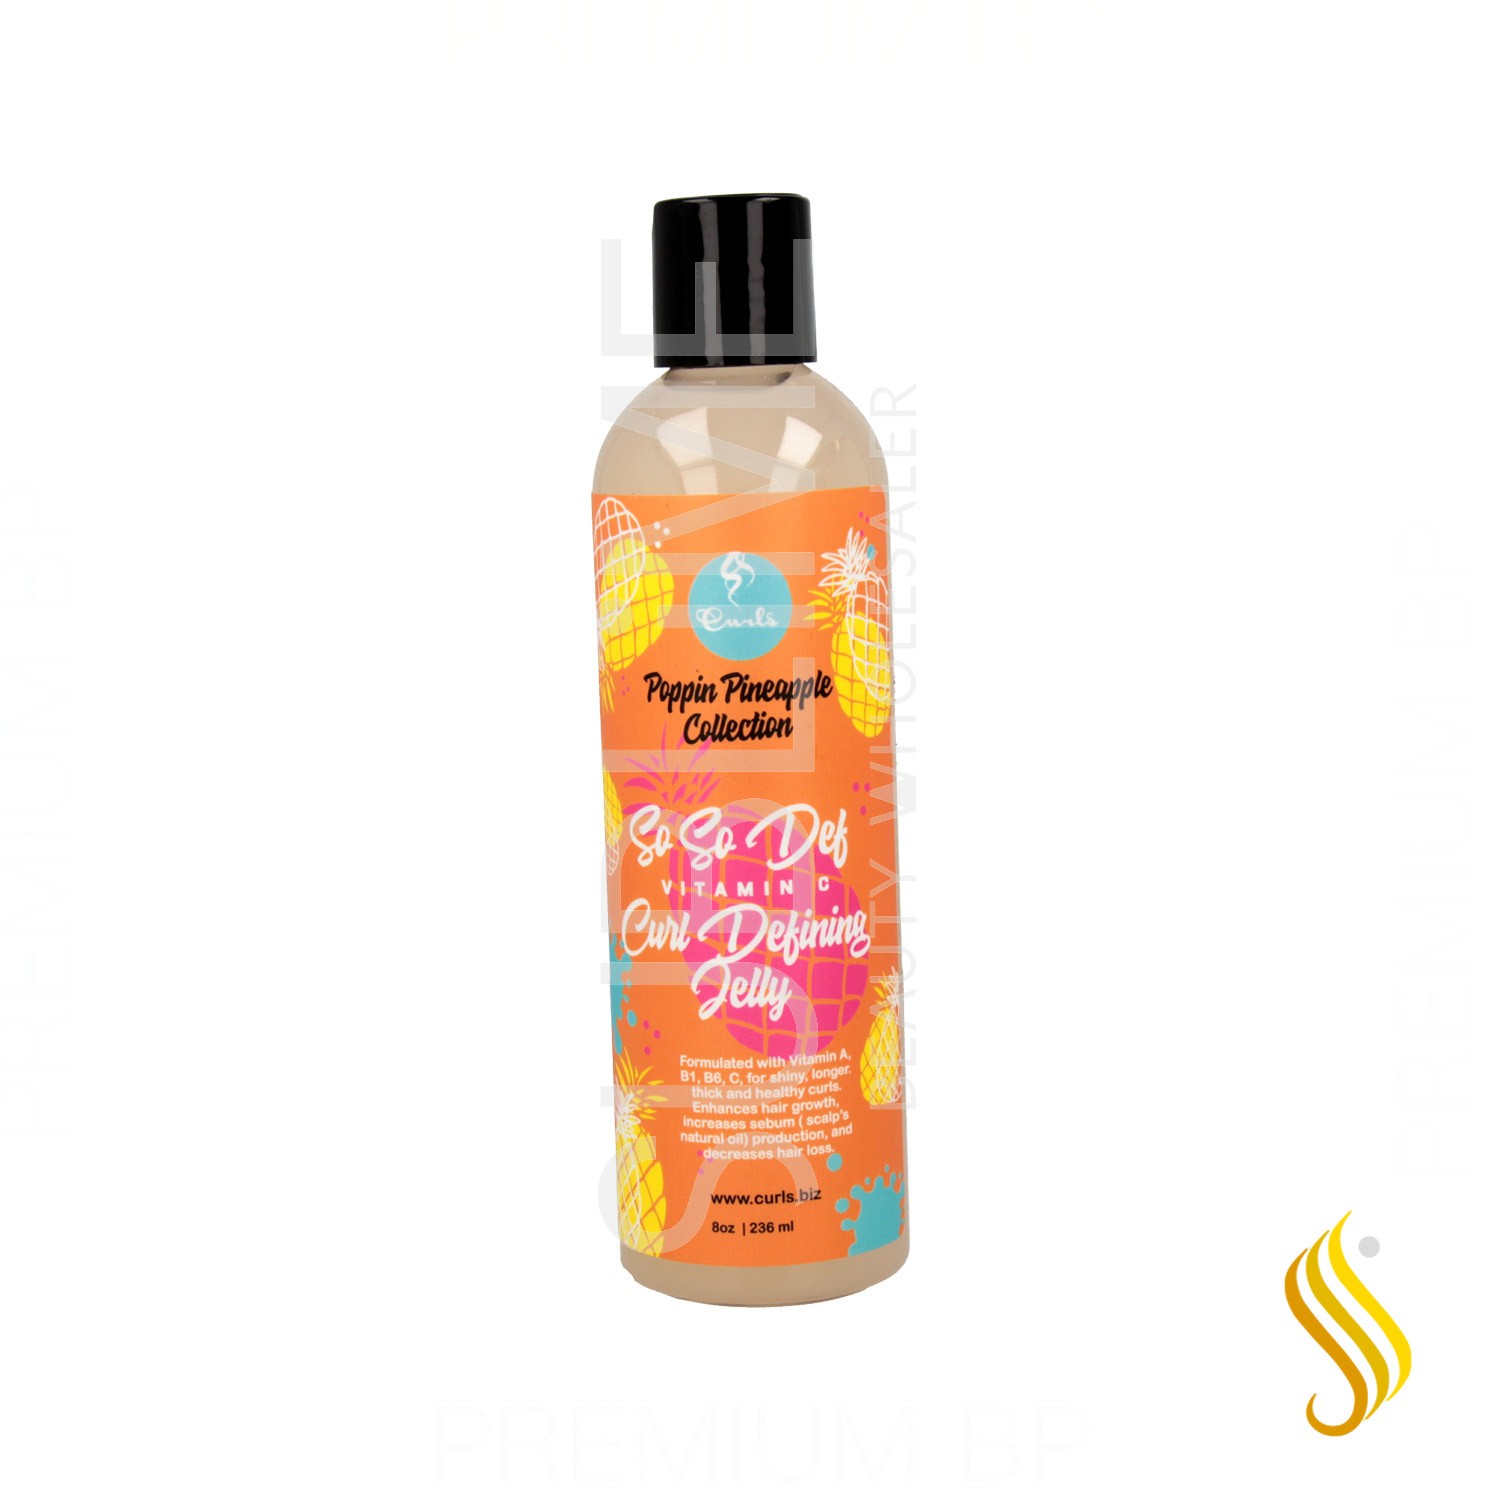 Curls Poppin Pineapple Collection So So Def Curl Defining Jelly 236 ml